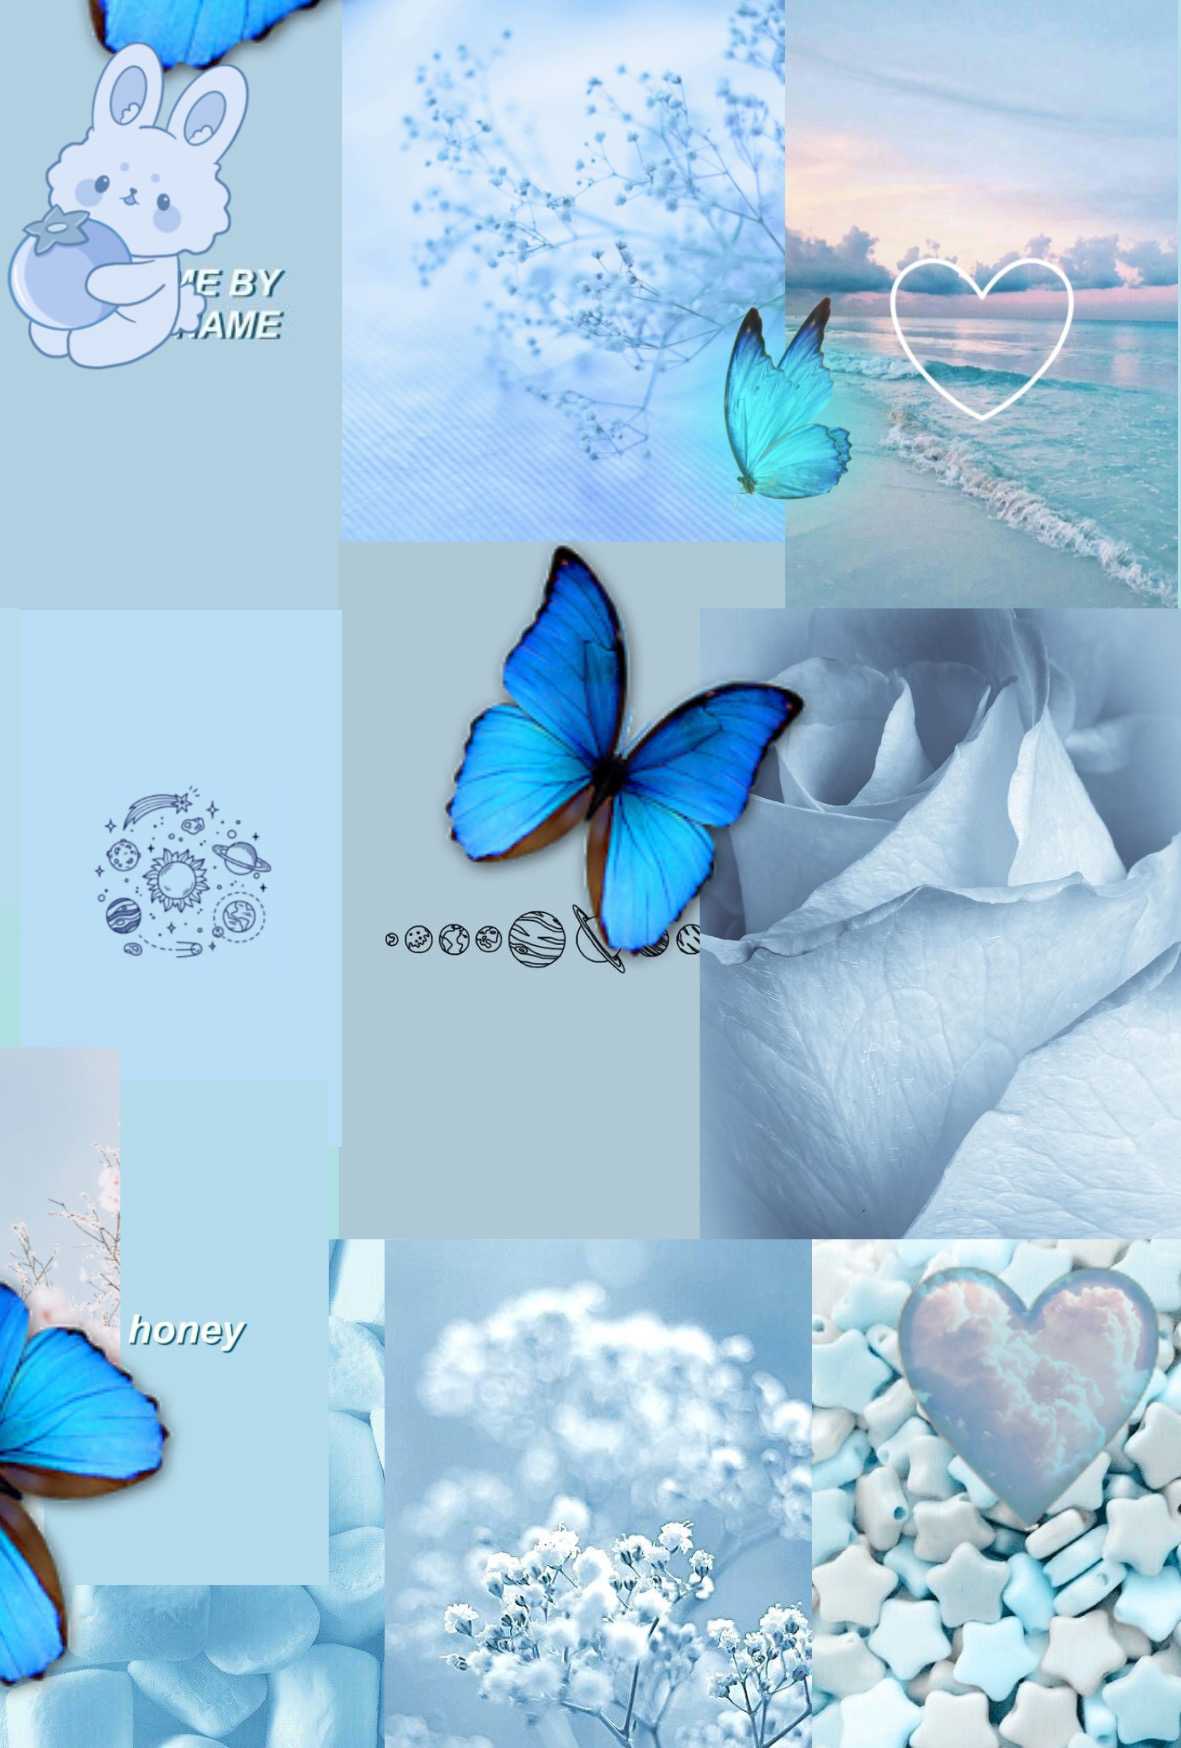 Aesthetic Blue Backgrounds